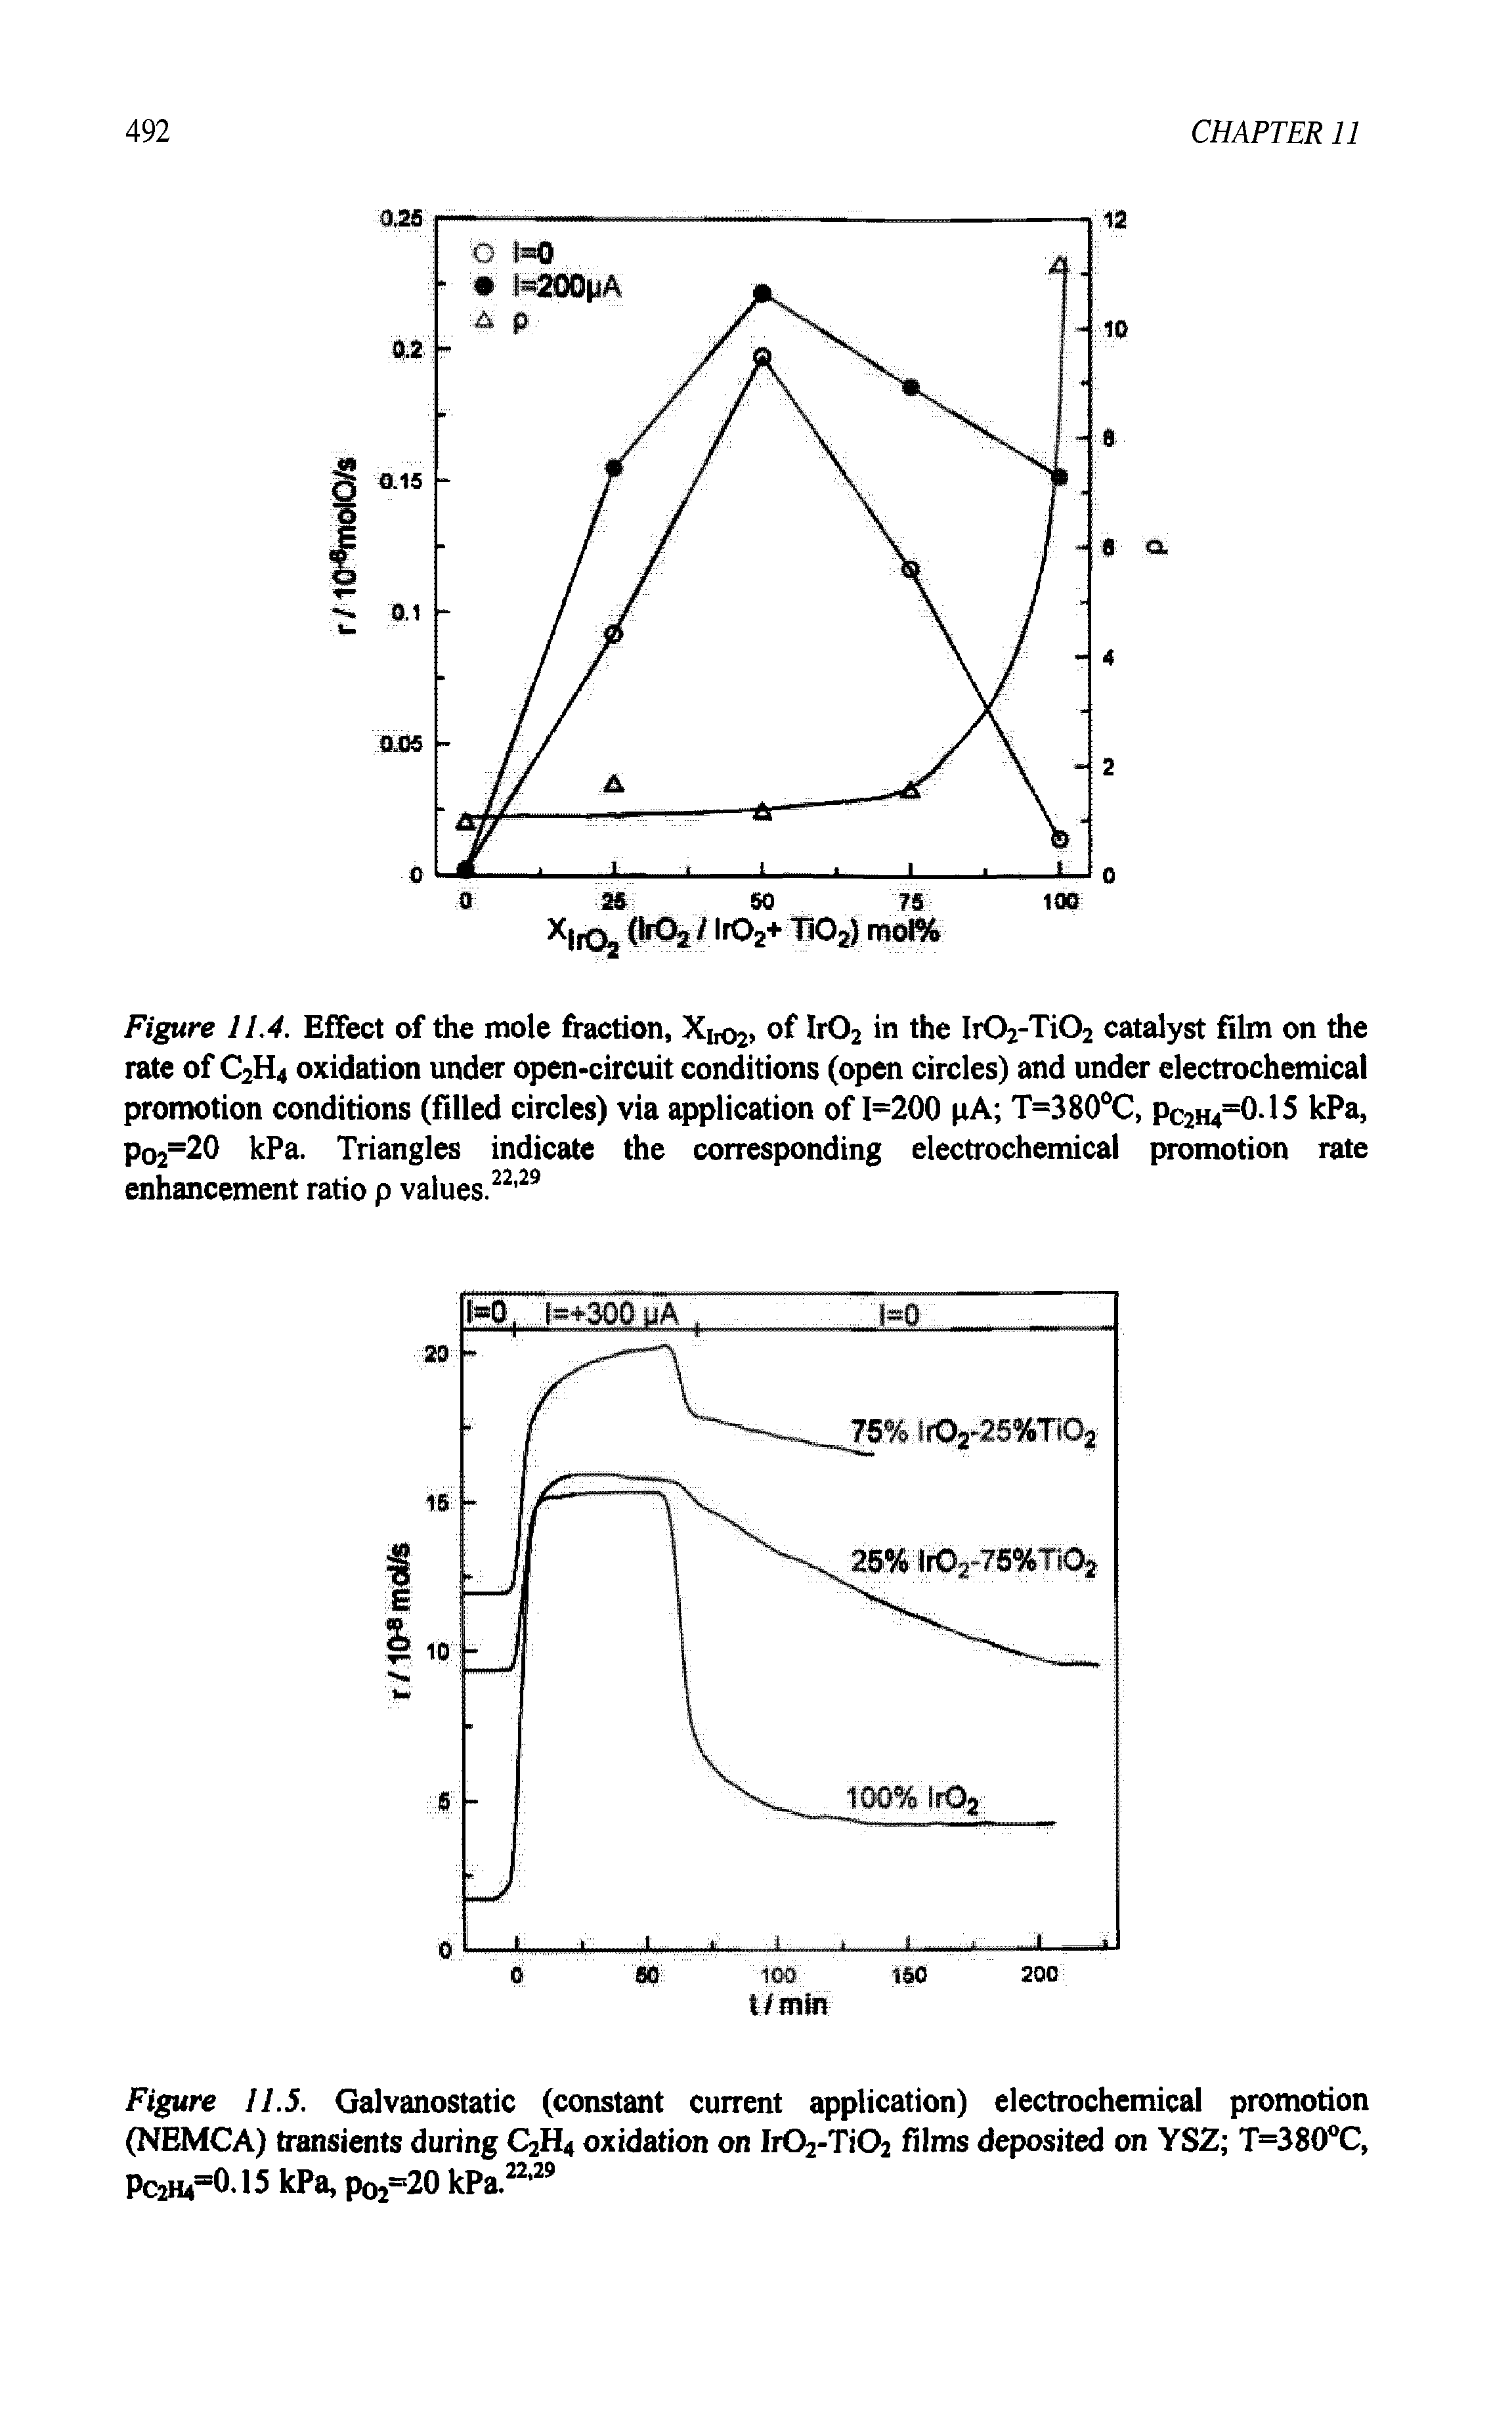 Figure 11.5. Galvanostatic (constant current application) electrochemical promotion (NEMCA) transients during C2H4 oxidation on Ir02-Ti02 films deposited on YSZ T=380°C, Pc2H4=0.15 kPa, pO2=20 kPa.22,29...